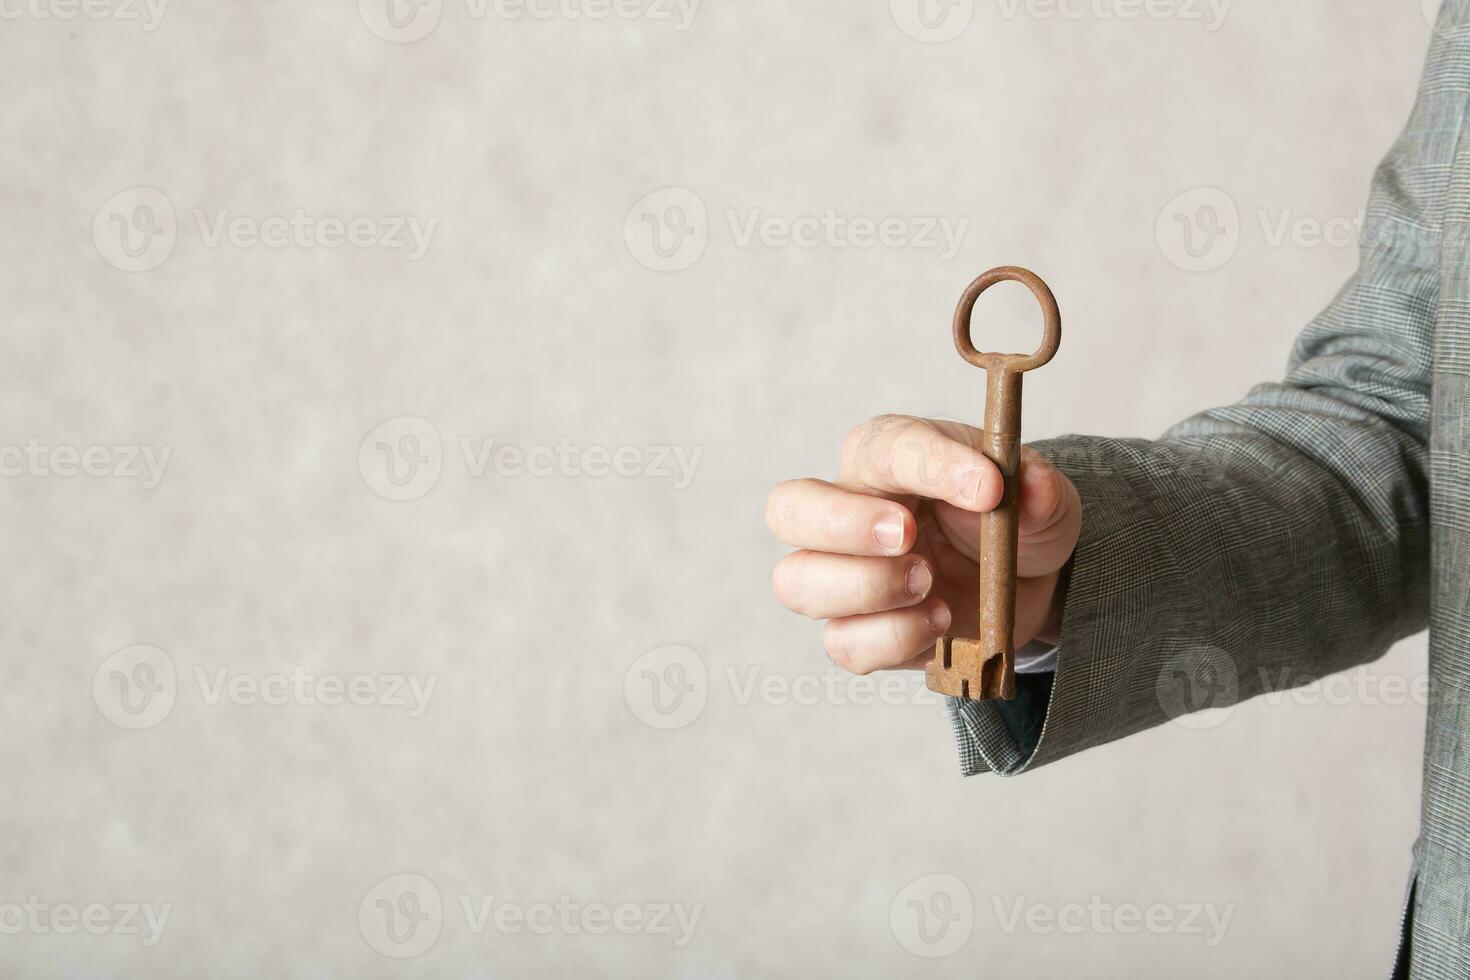 An old key in the hand of a man. Closeup photo